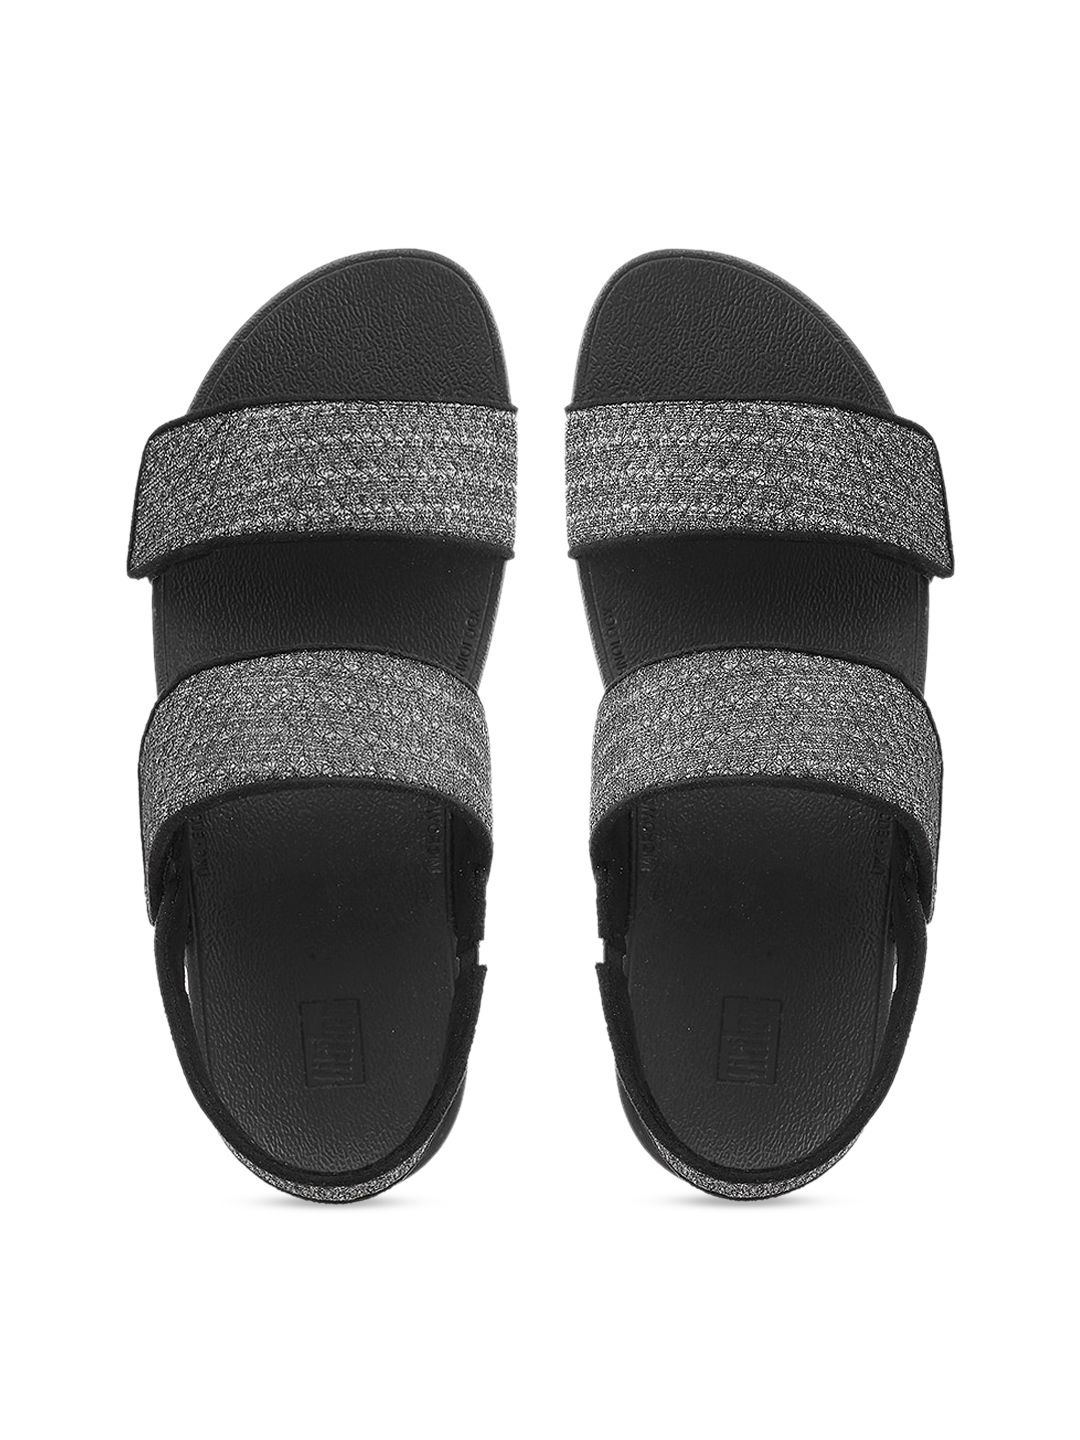 fitflop Black Wedge Sandals Price in India